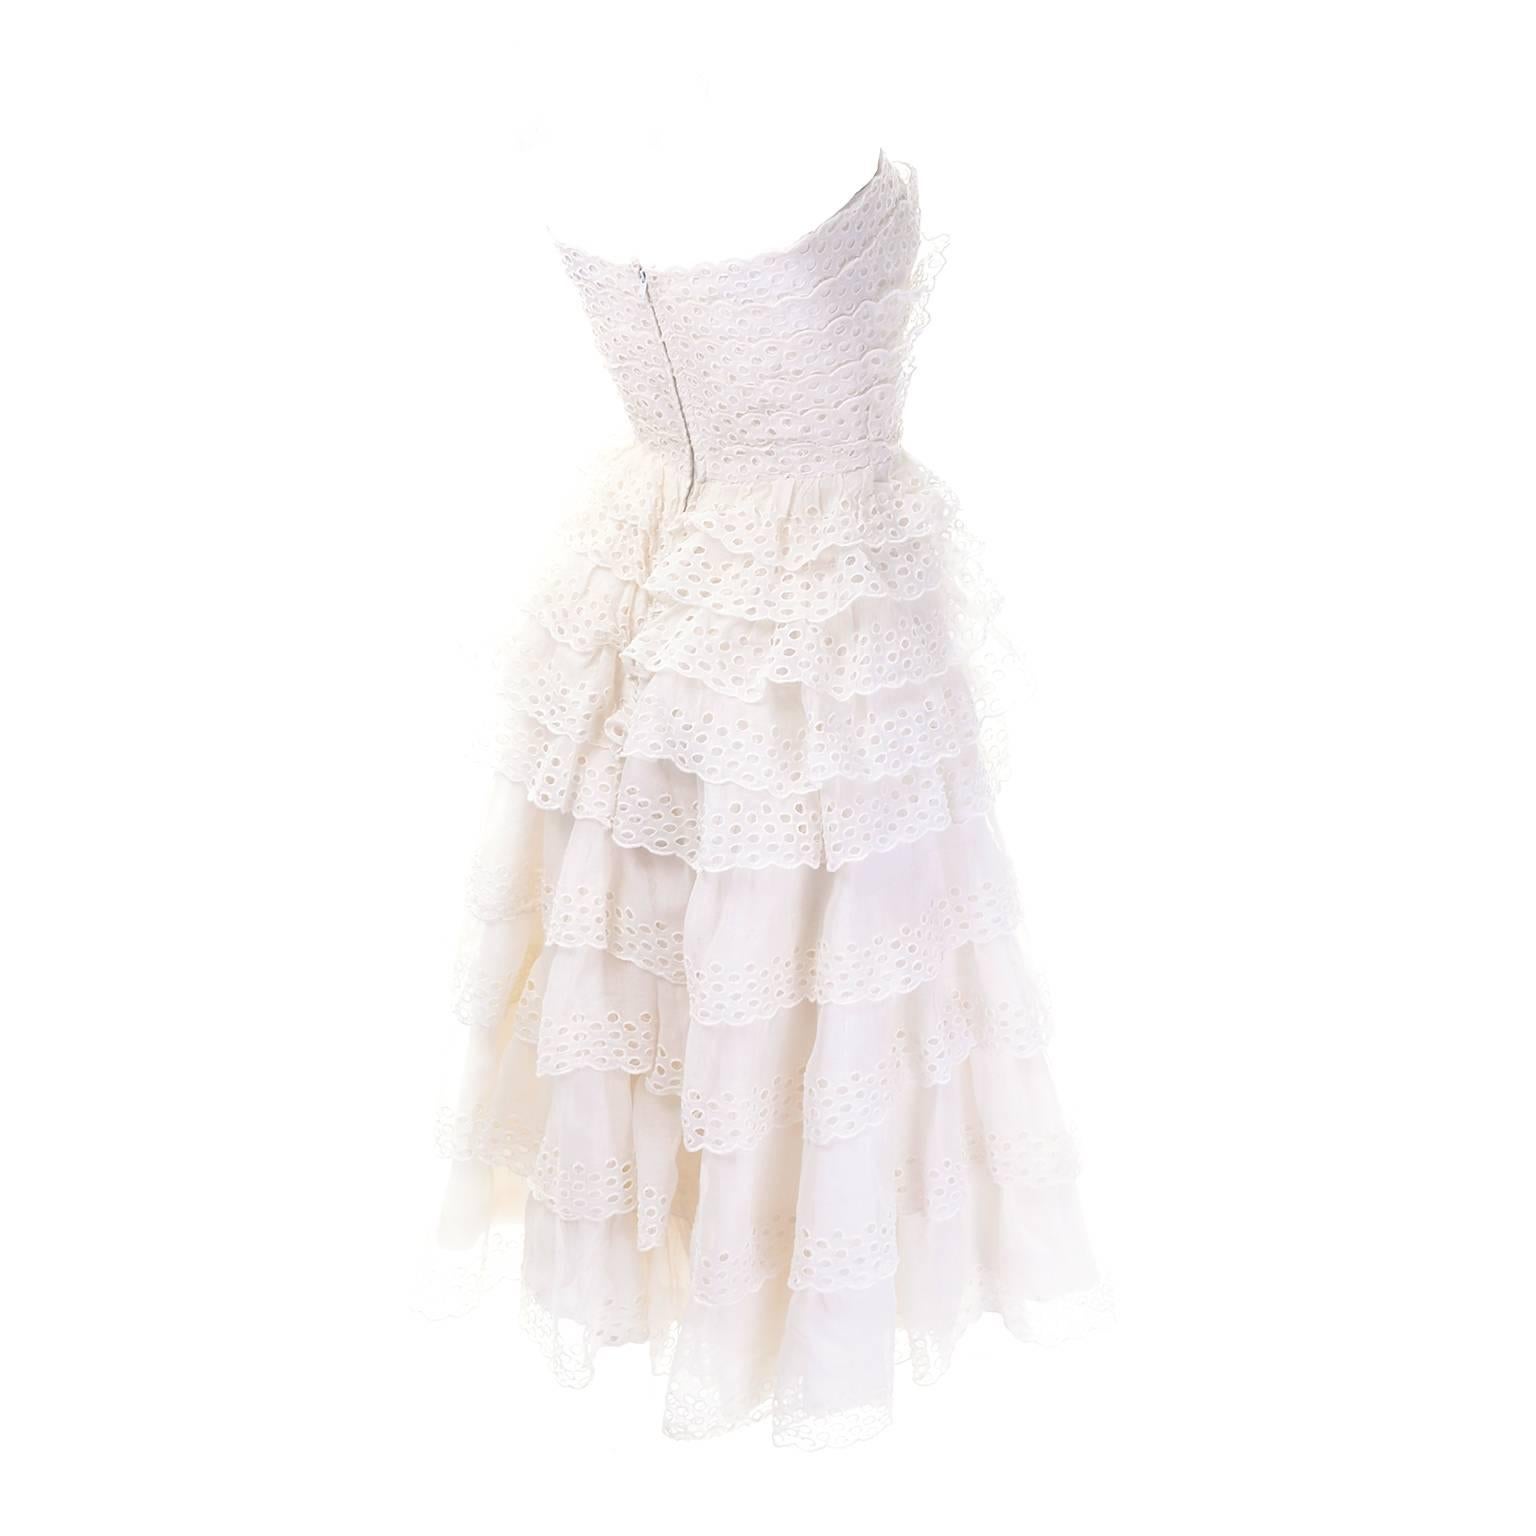 This is such a beautiful vintage white dress from Suzy Perette. There are layers of tiered eyelet ruffles with scalloped edges and six rows of eyelets along the edge of each ruffle. This strapless dress is fully lined, with 